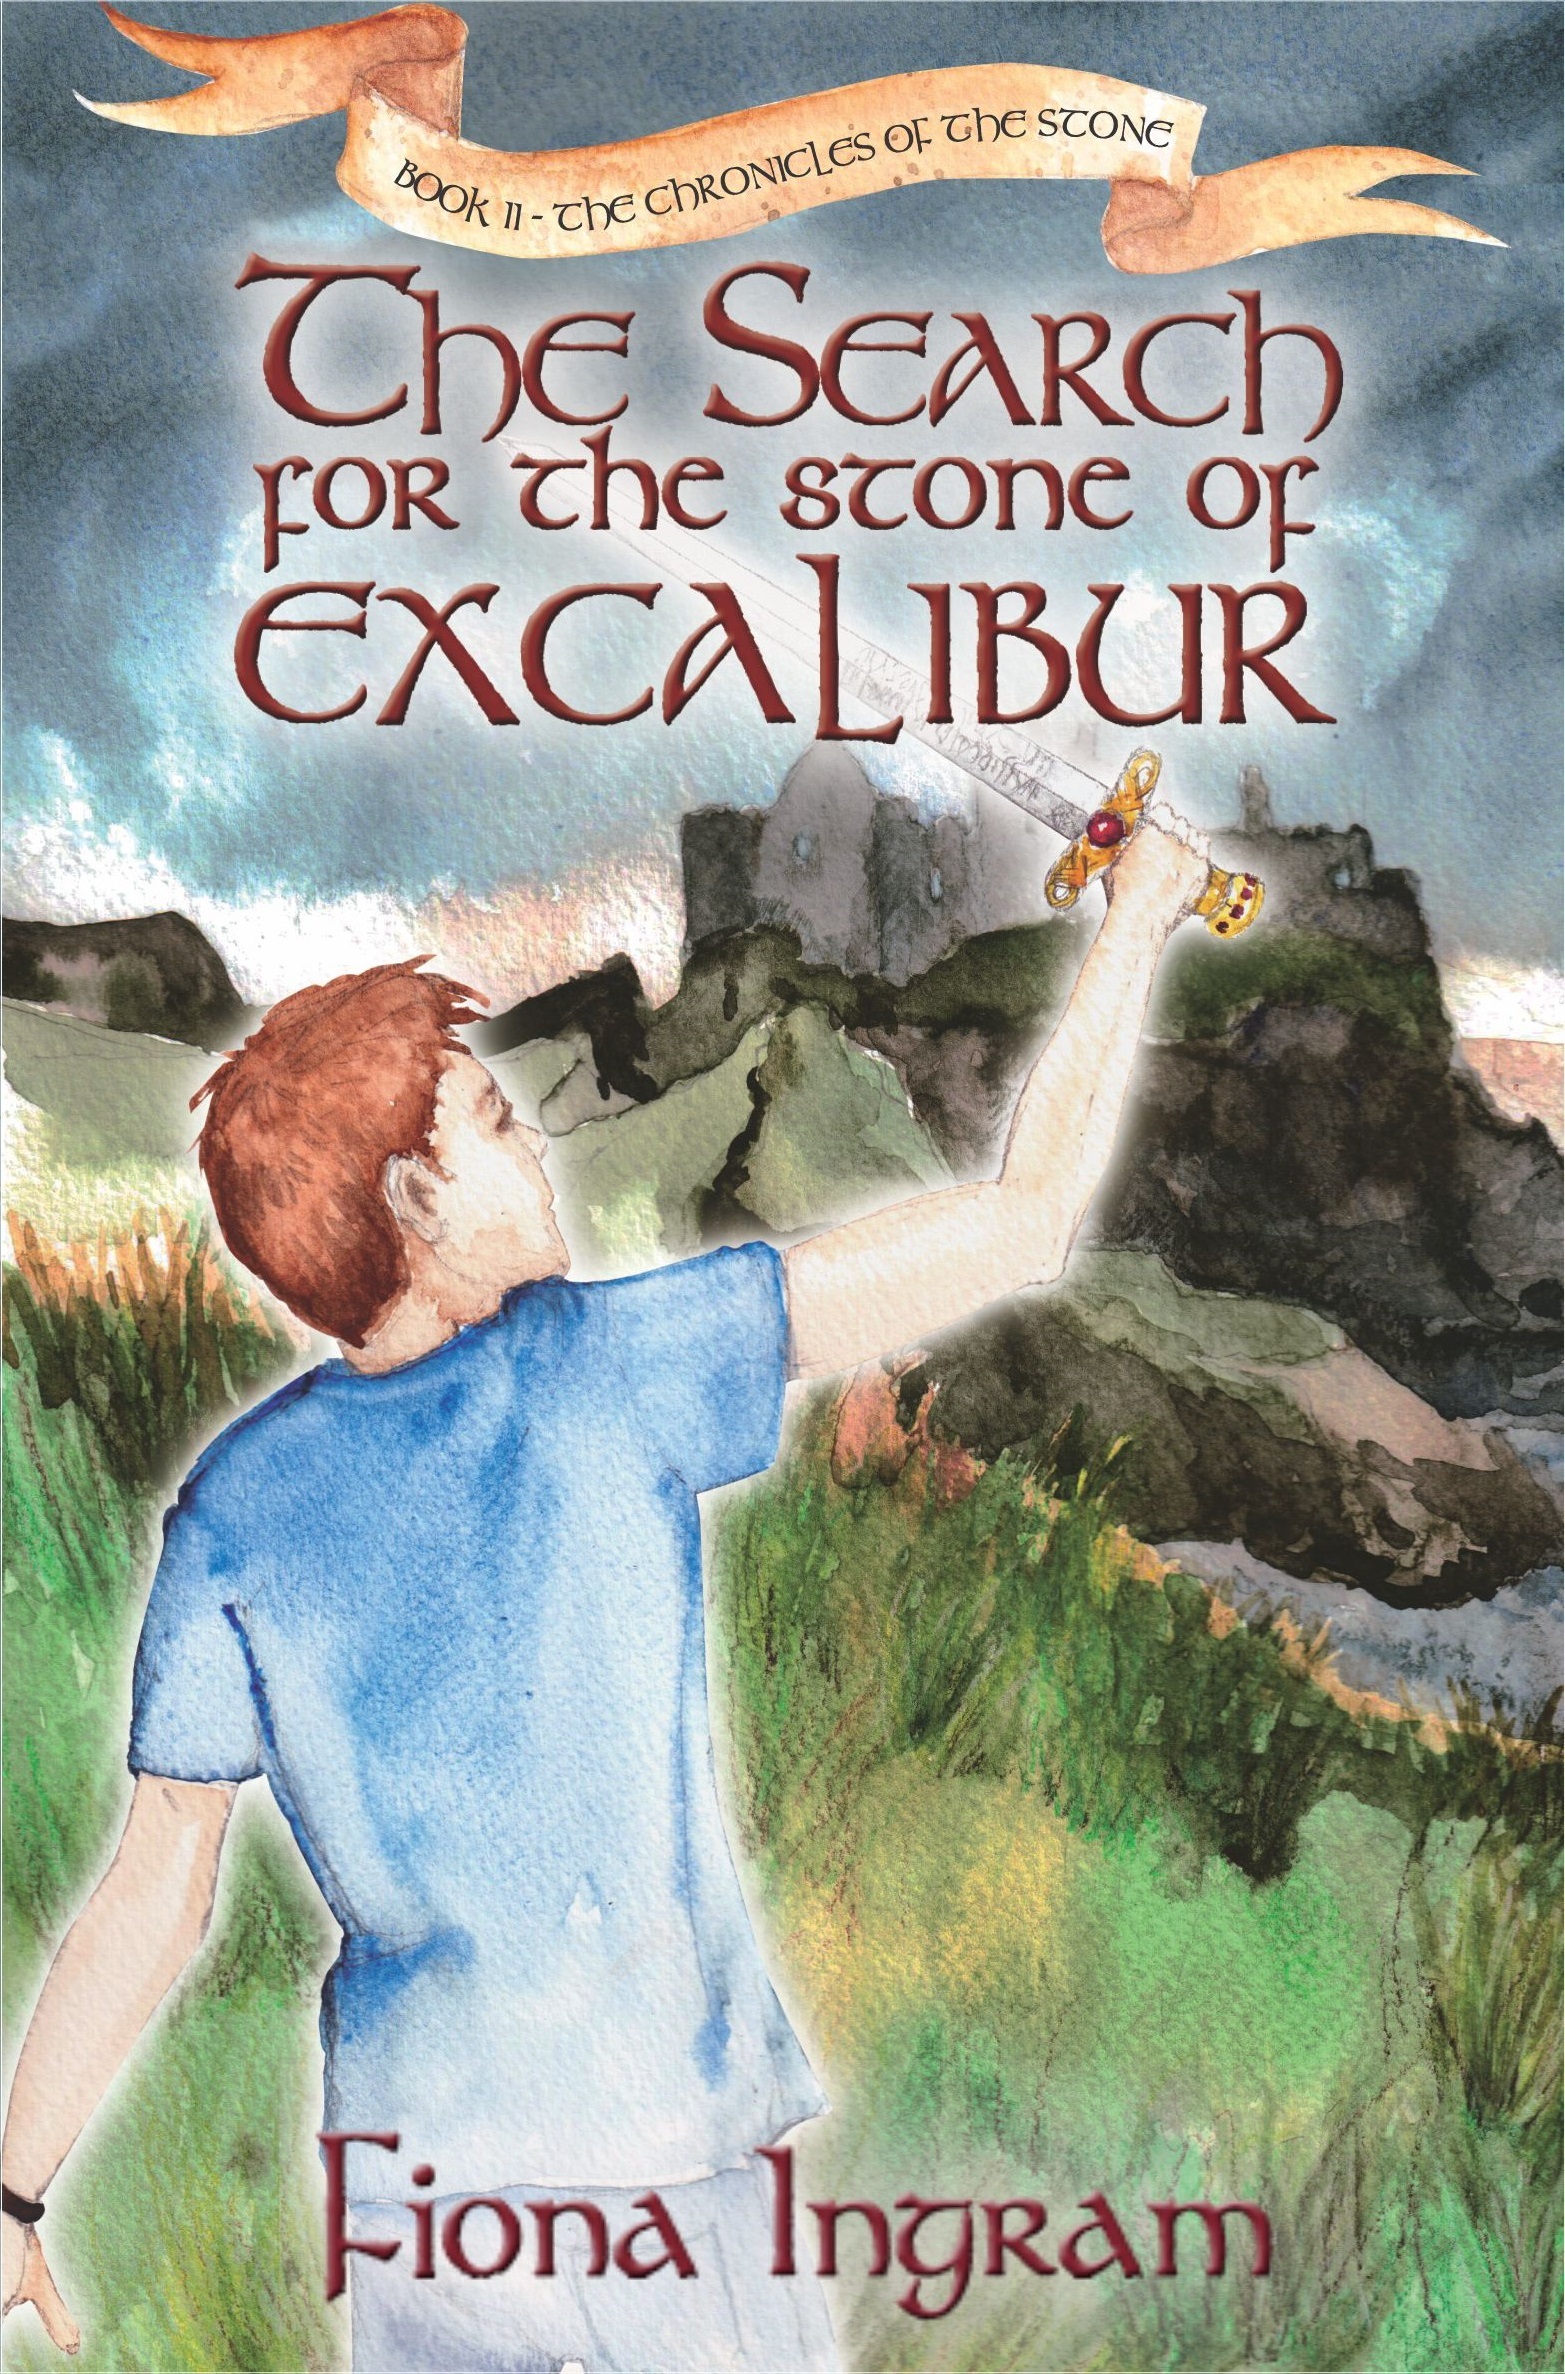 The Search for the Stone of Excalibur: Book Two of The Chronicles of the Stone.